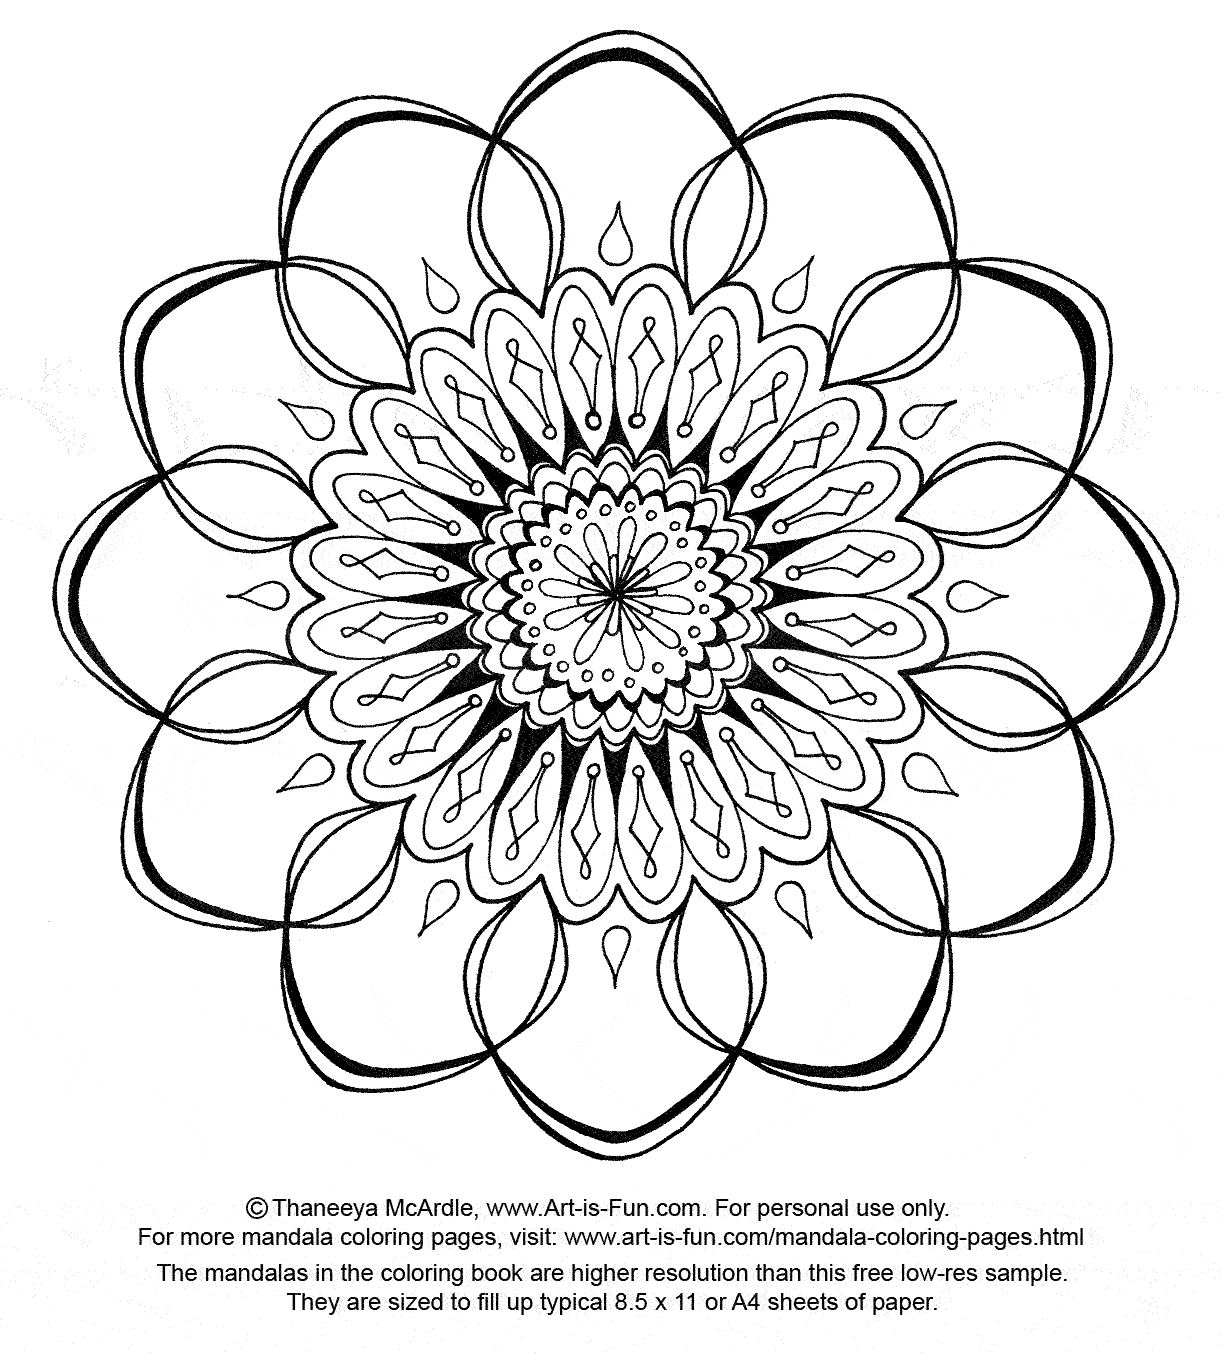 Mandala Coloring pages | FREE coloring pages | #25